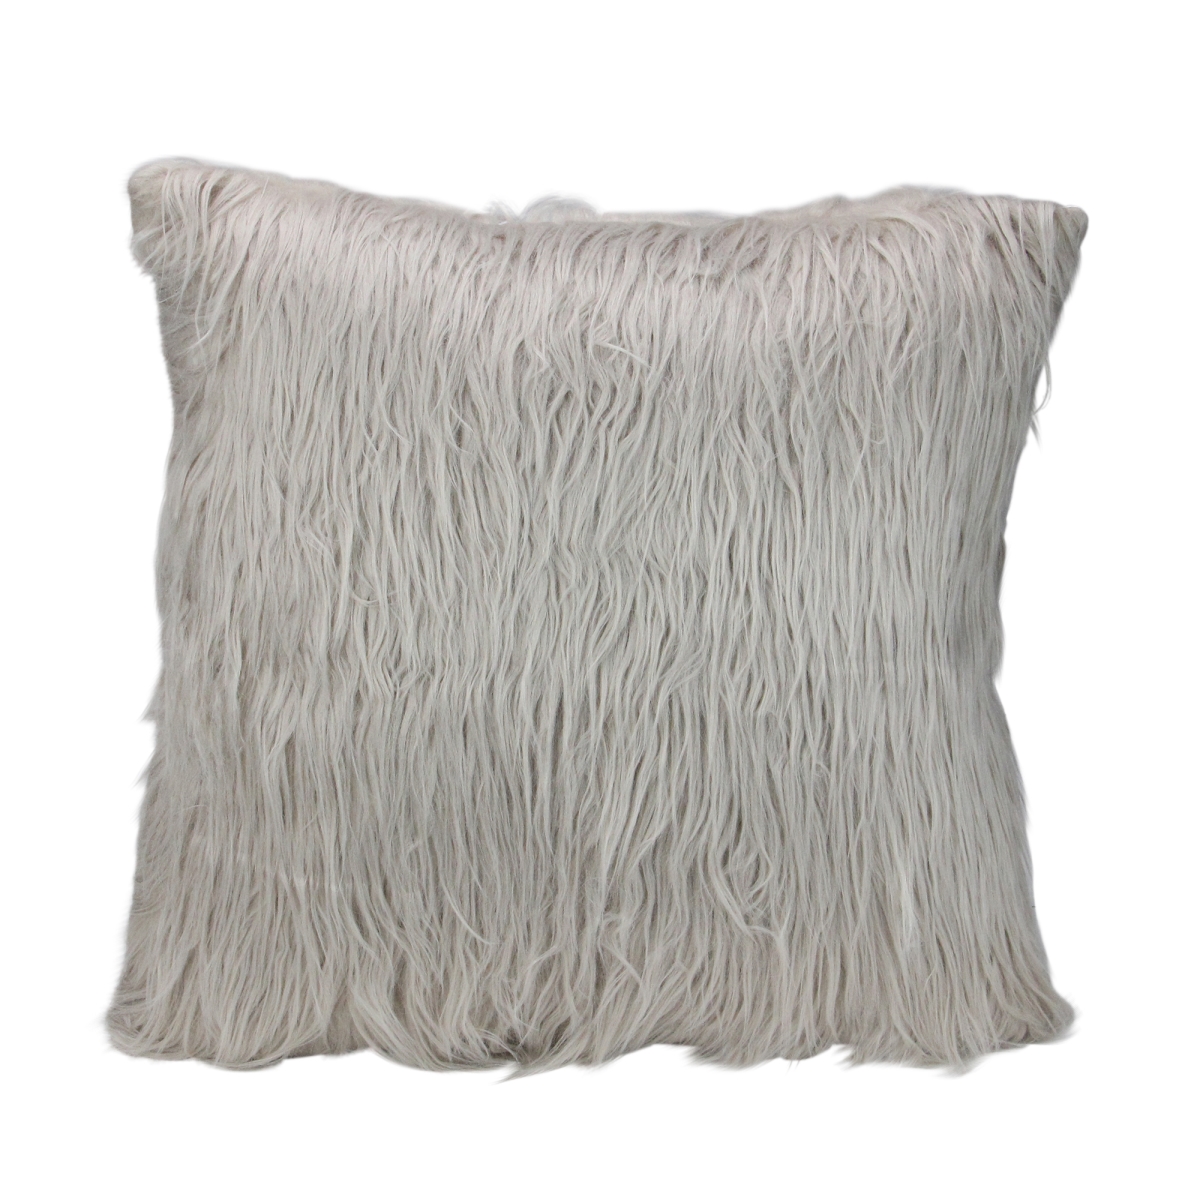 32913600 17 In. Beige Taupe Faux Fur Throw Pillow With Suede Backing